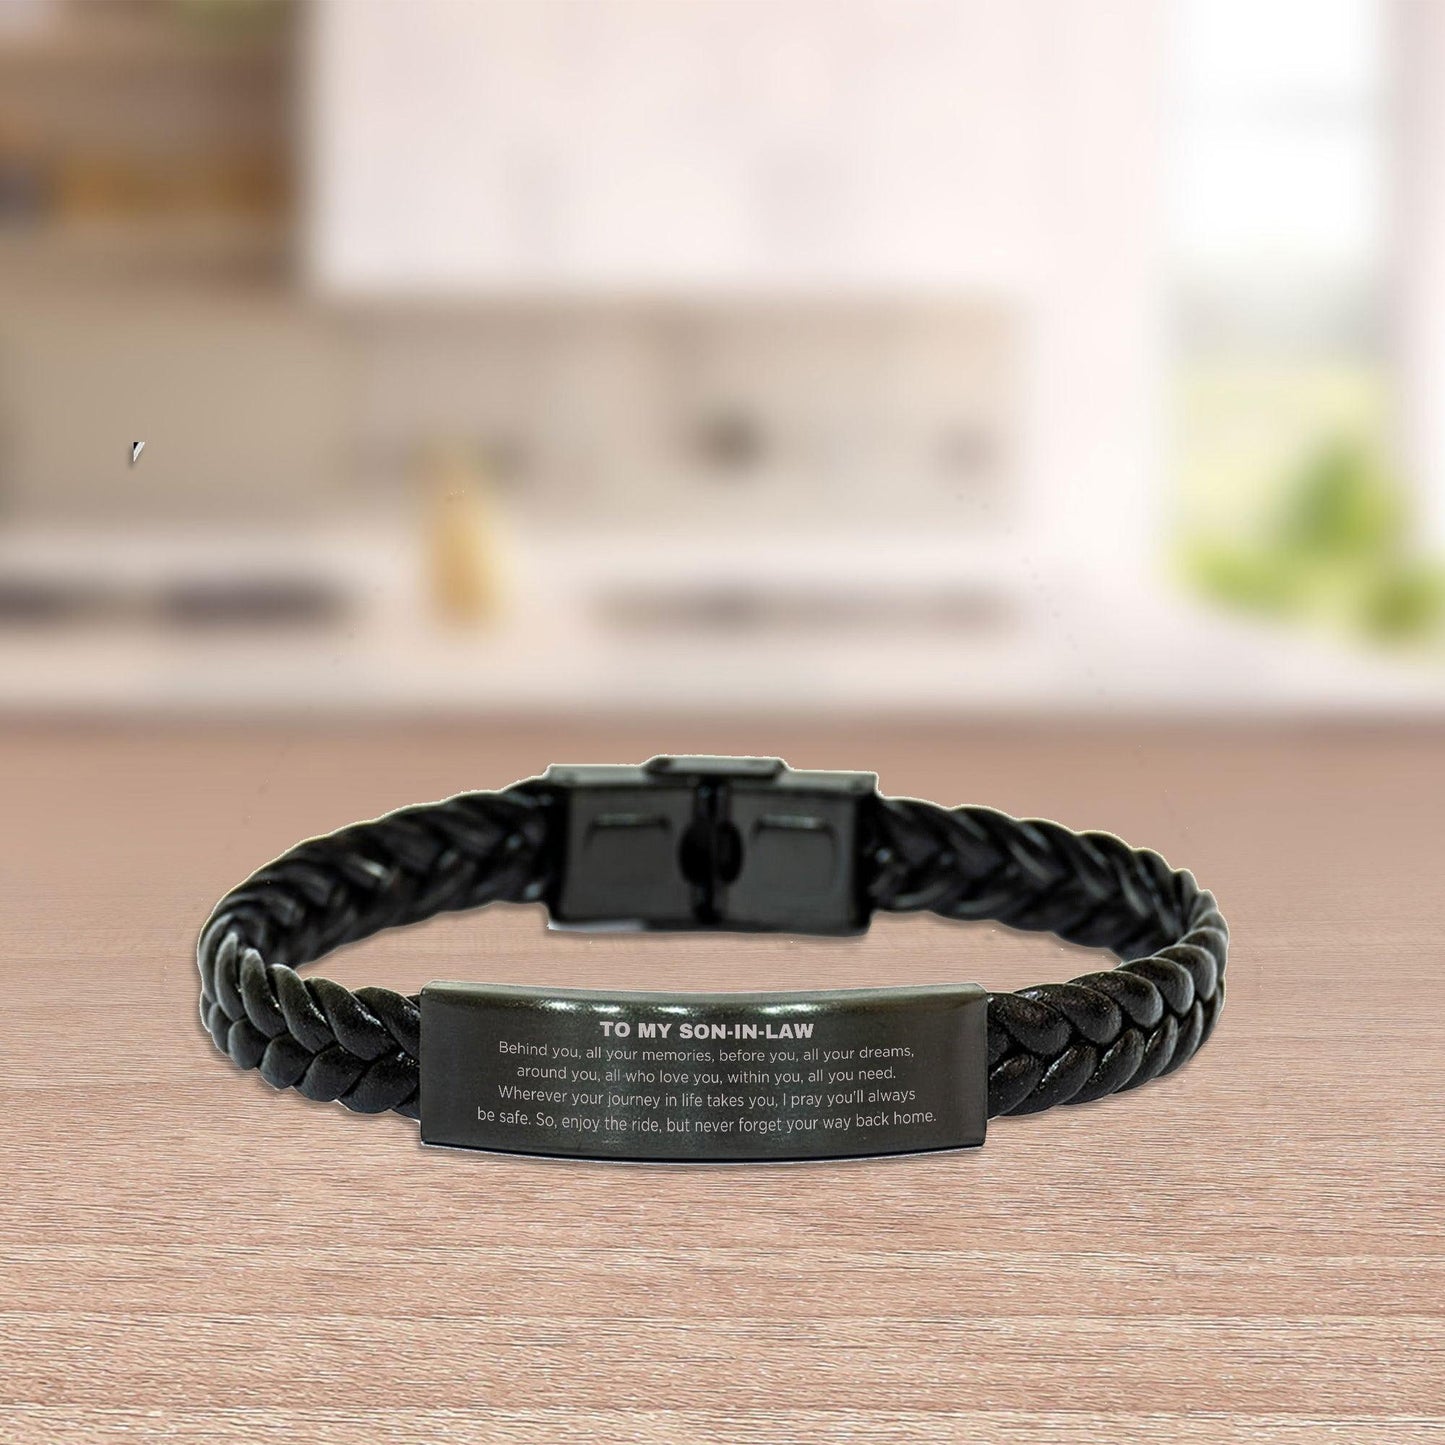 Inspirational Son-In-Law Braided Leather Bracelet, Sentimental Birthday Christmas Unique Gifts For Son In Law Behind you, all your memories, before you, all your dreams, around you, all who love you, within you, all you need - Mallard Moon Gift Shop